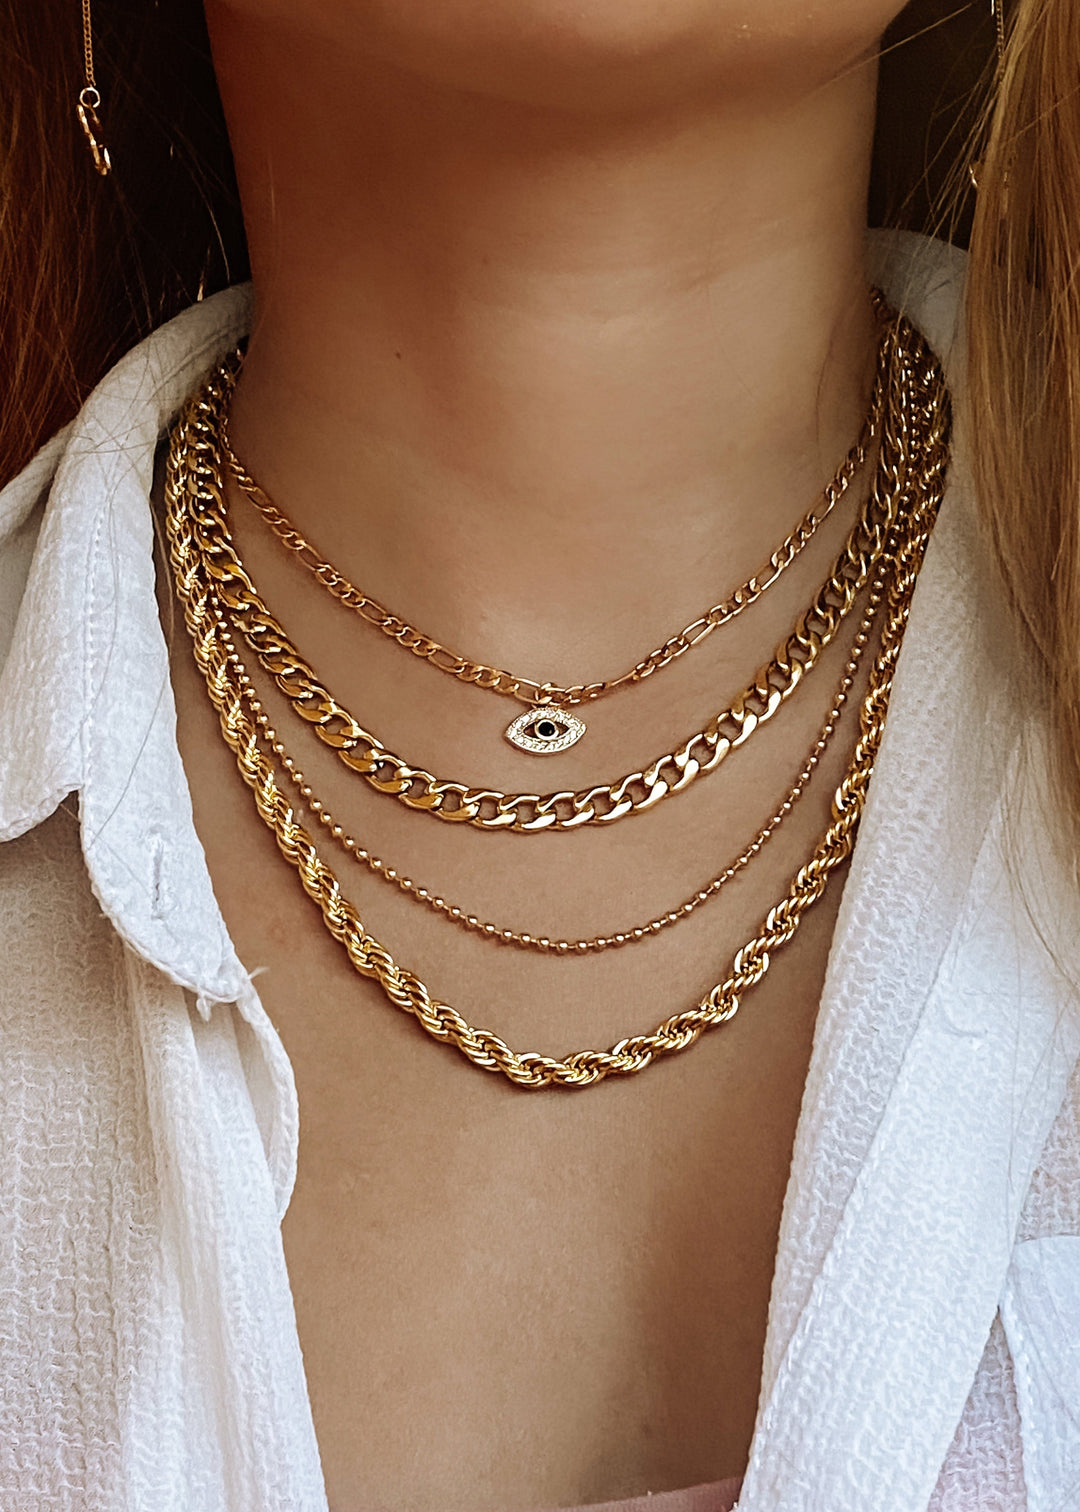 Chunky Rope Necklace - Gold Filled